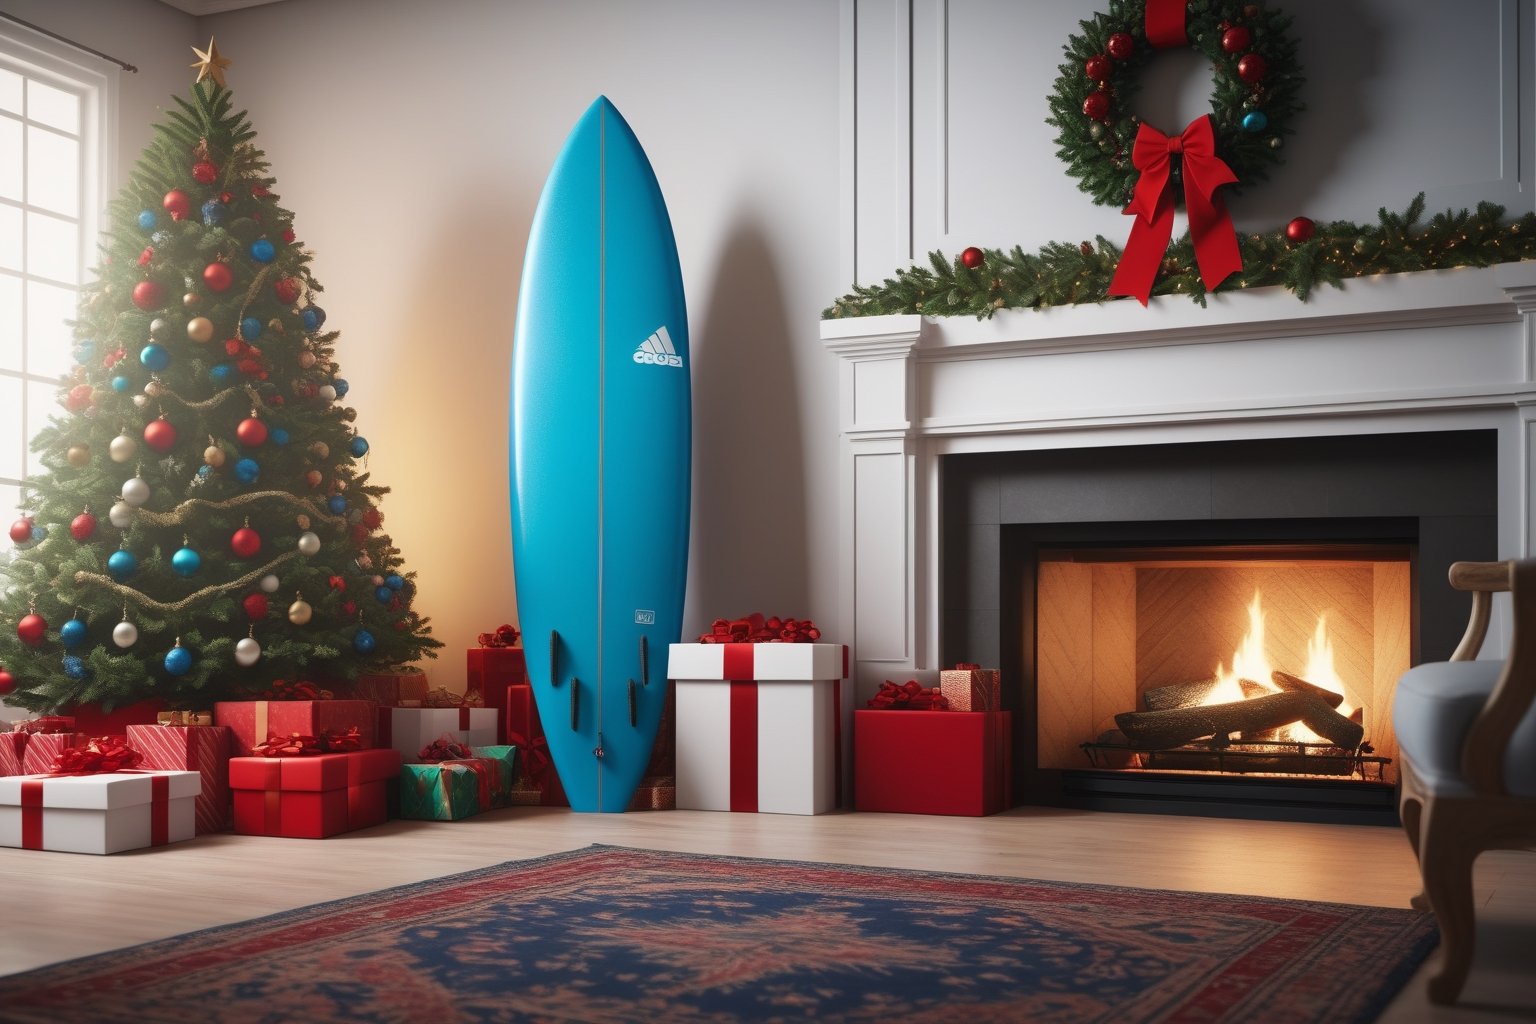 a new  blue surfboard is standing upright with a big red bow on it leaning against the fireplace mantle next to a large decorated Christmas tree surrounded by lots of presents, photorealistic, cinematic, 8k wallpaper 